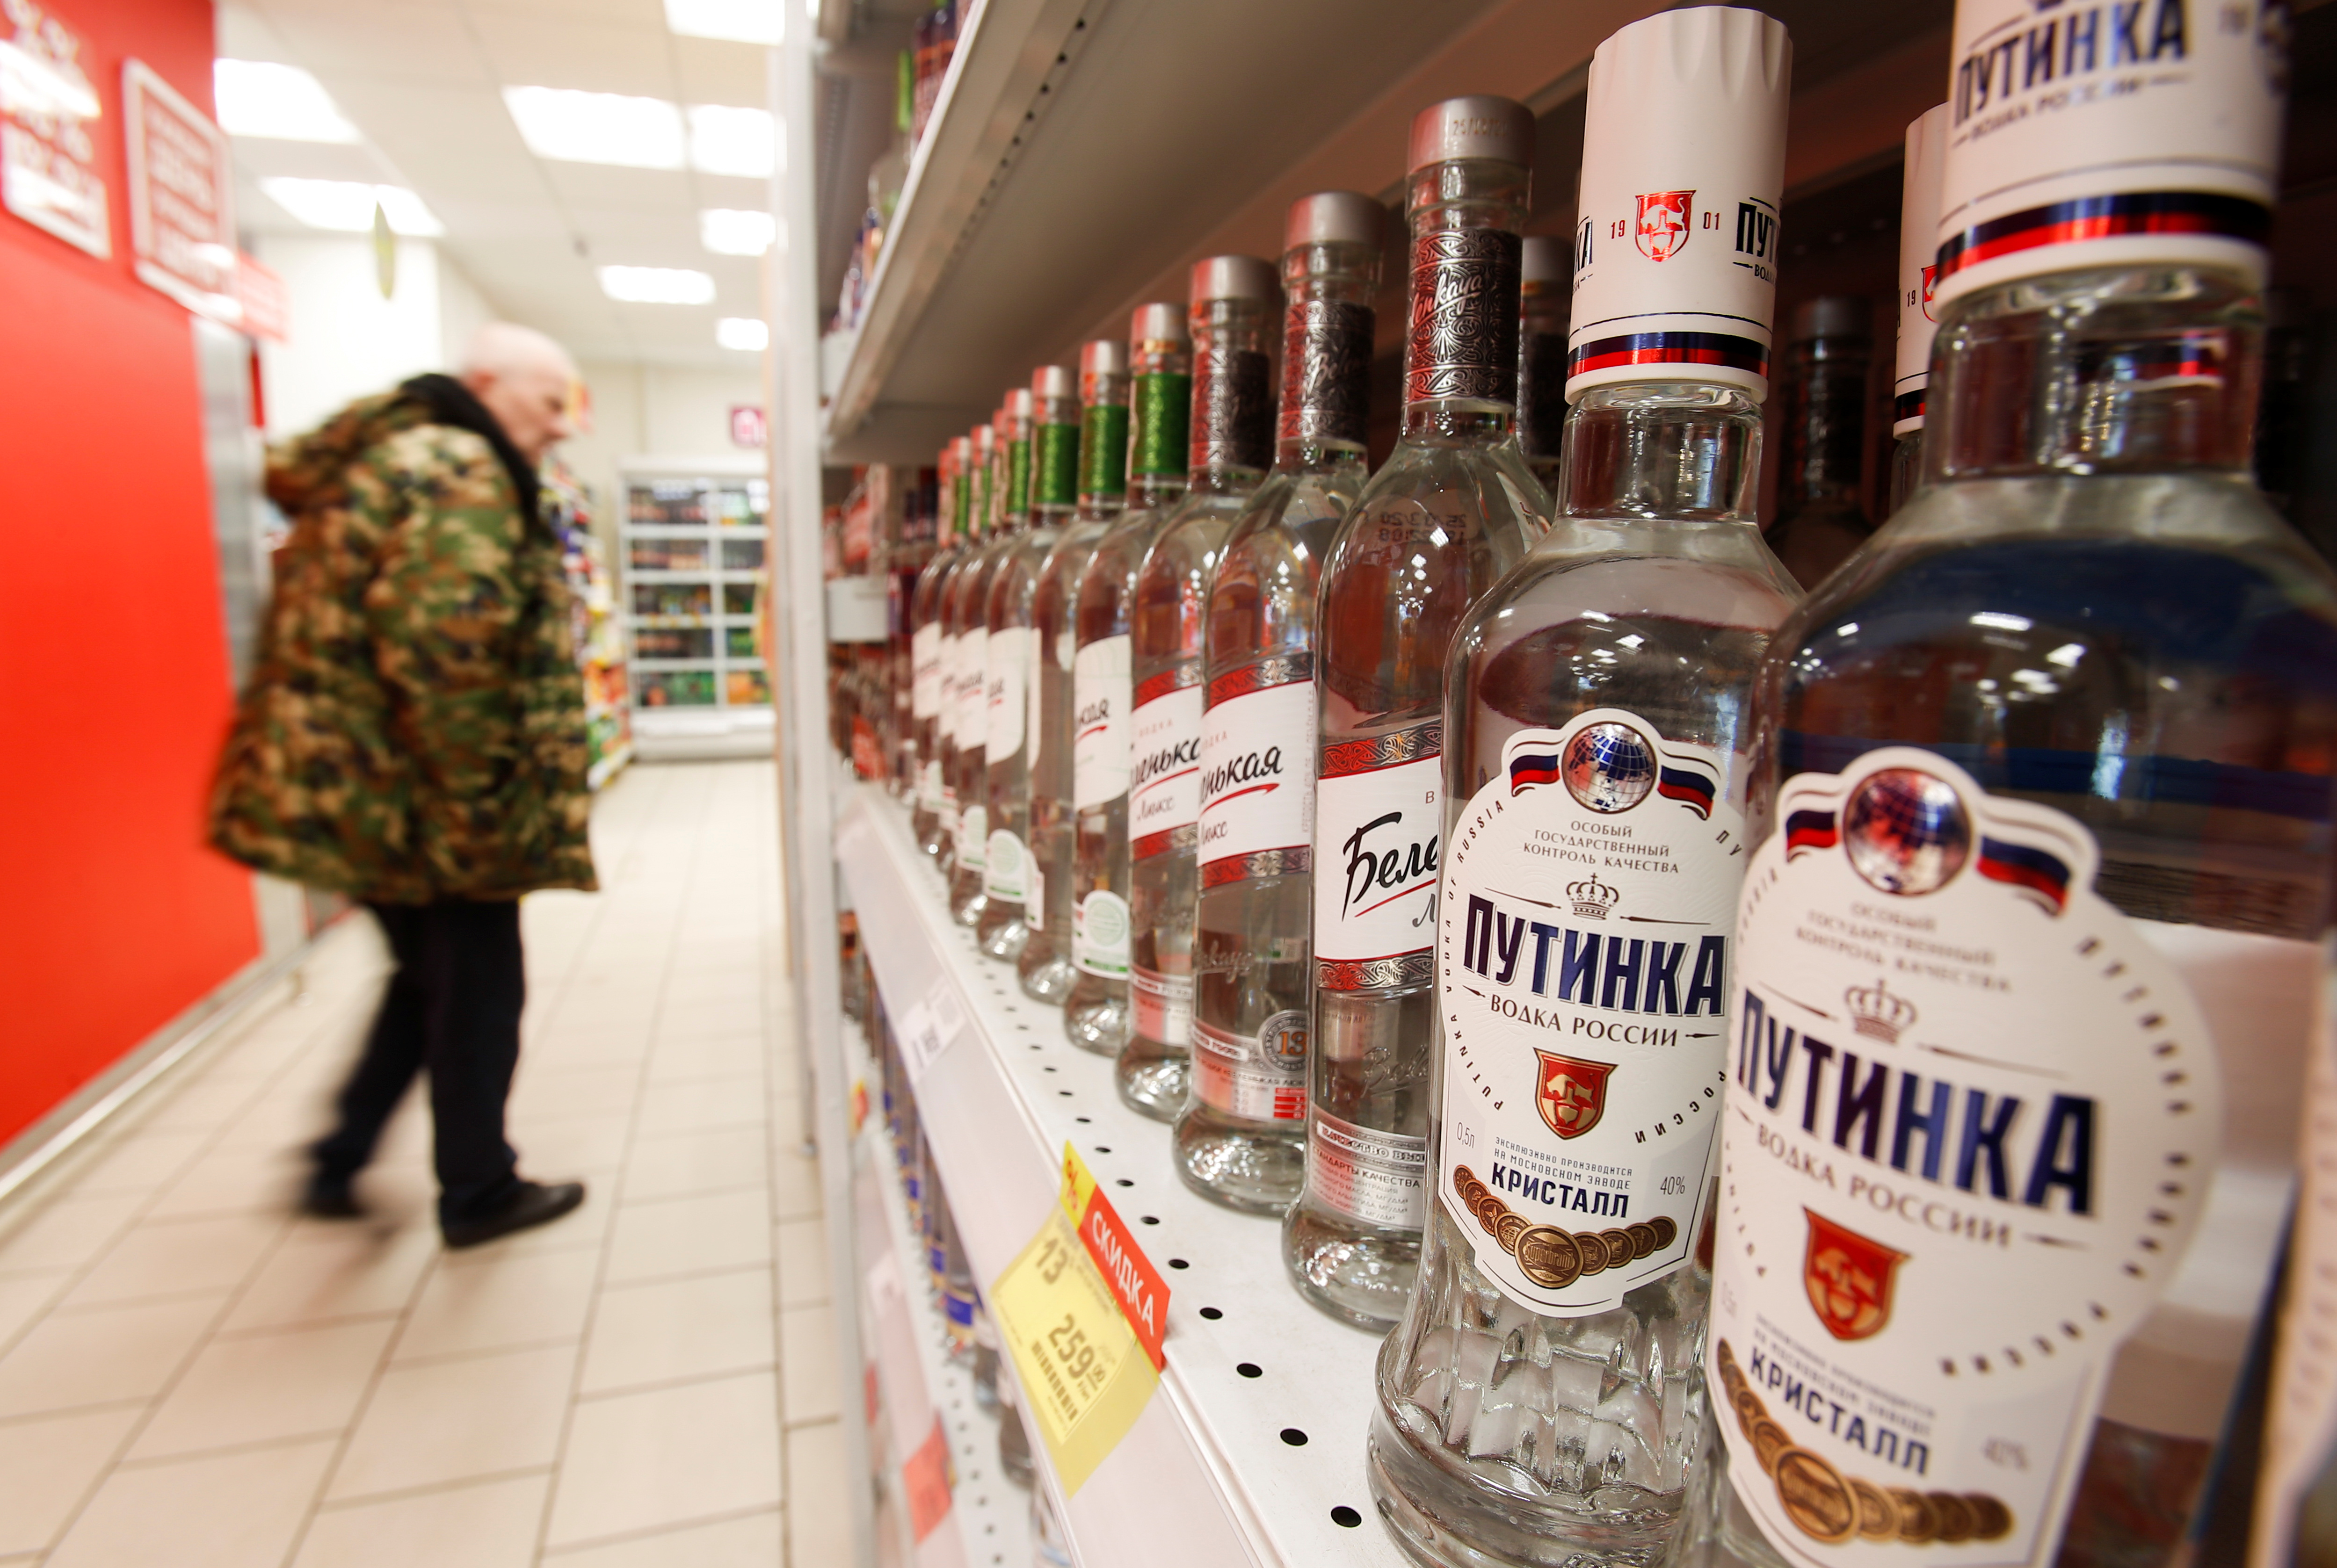 A customer walks past shelves with bottles of vodka in a supermarket in Moscow